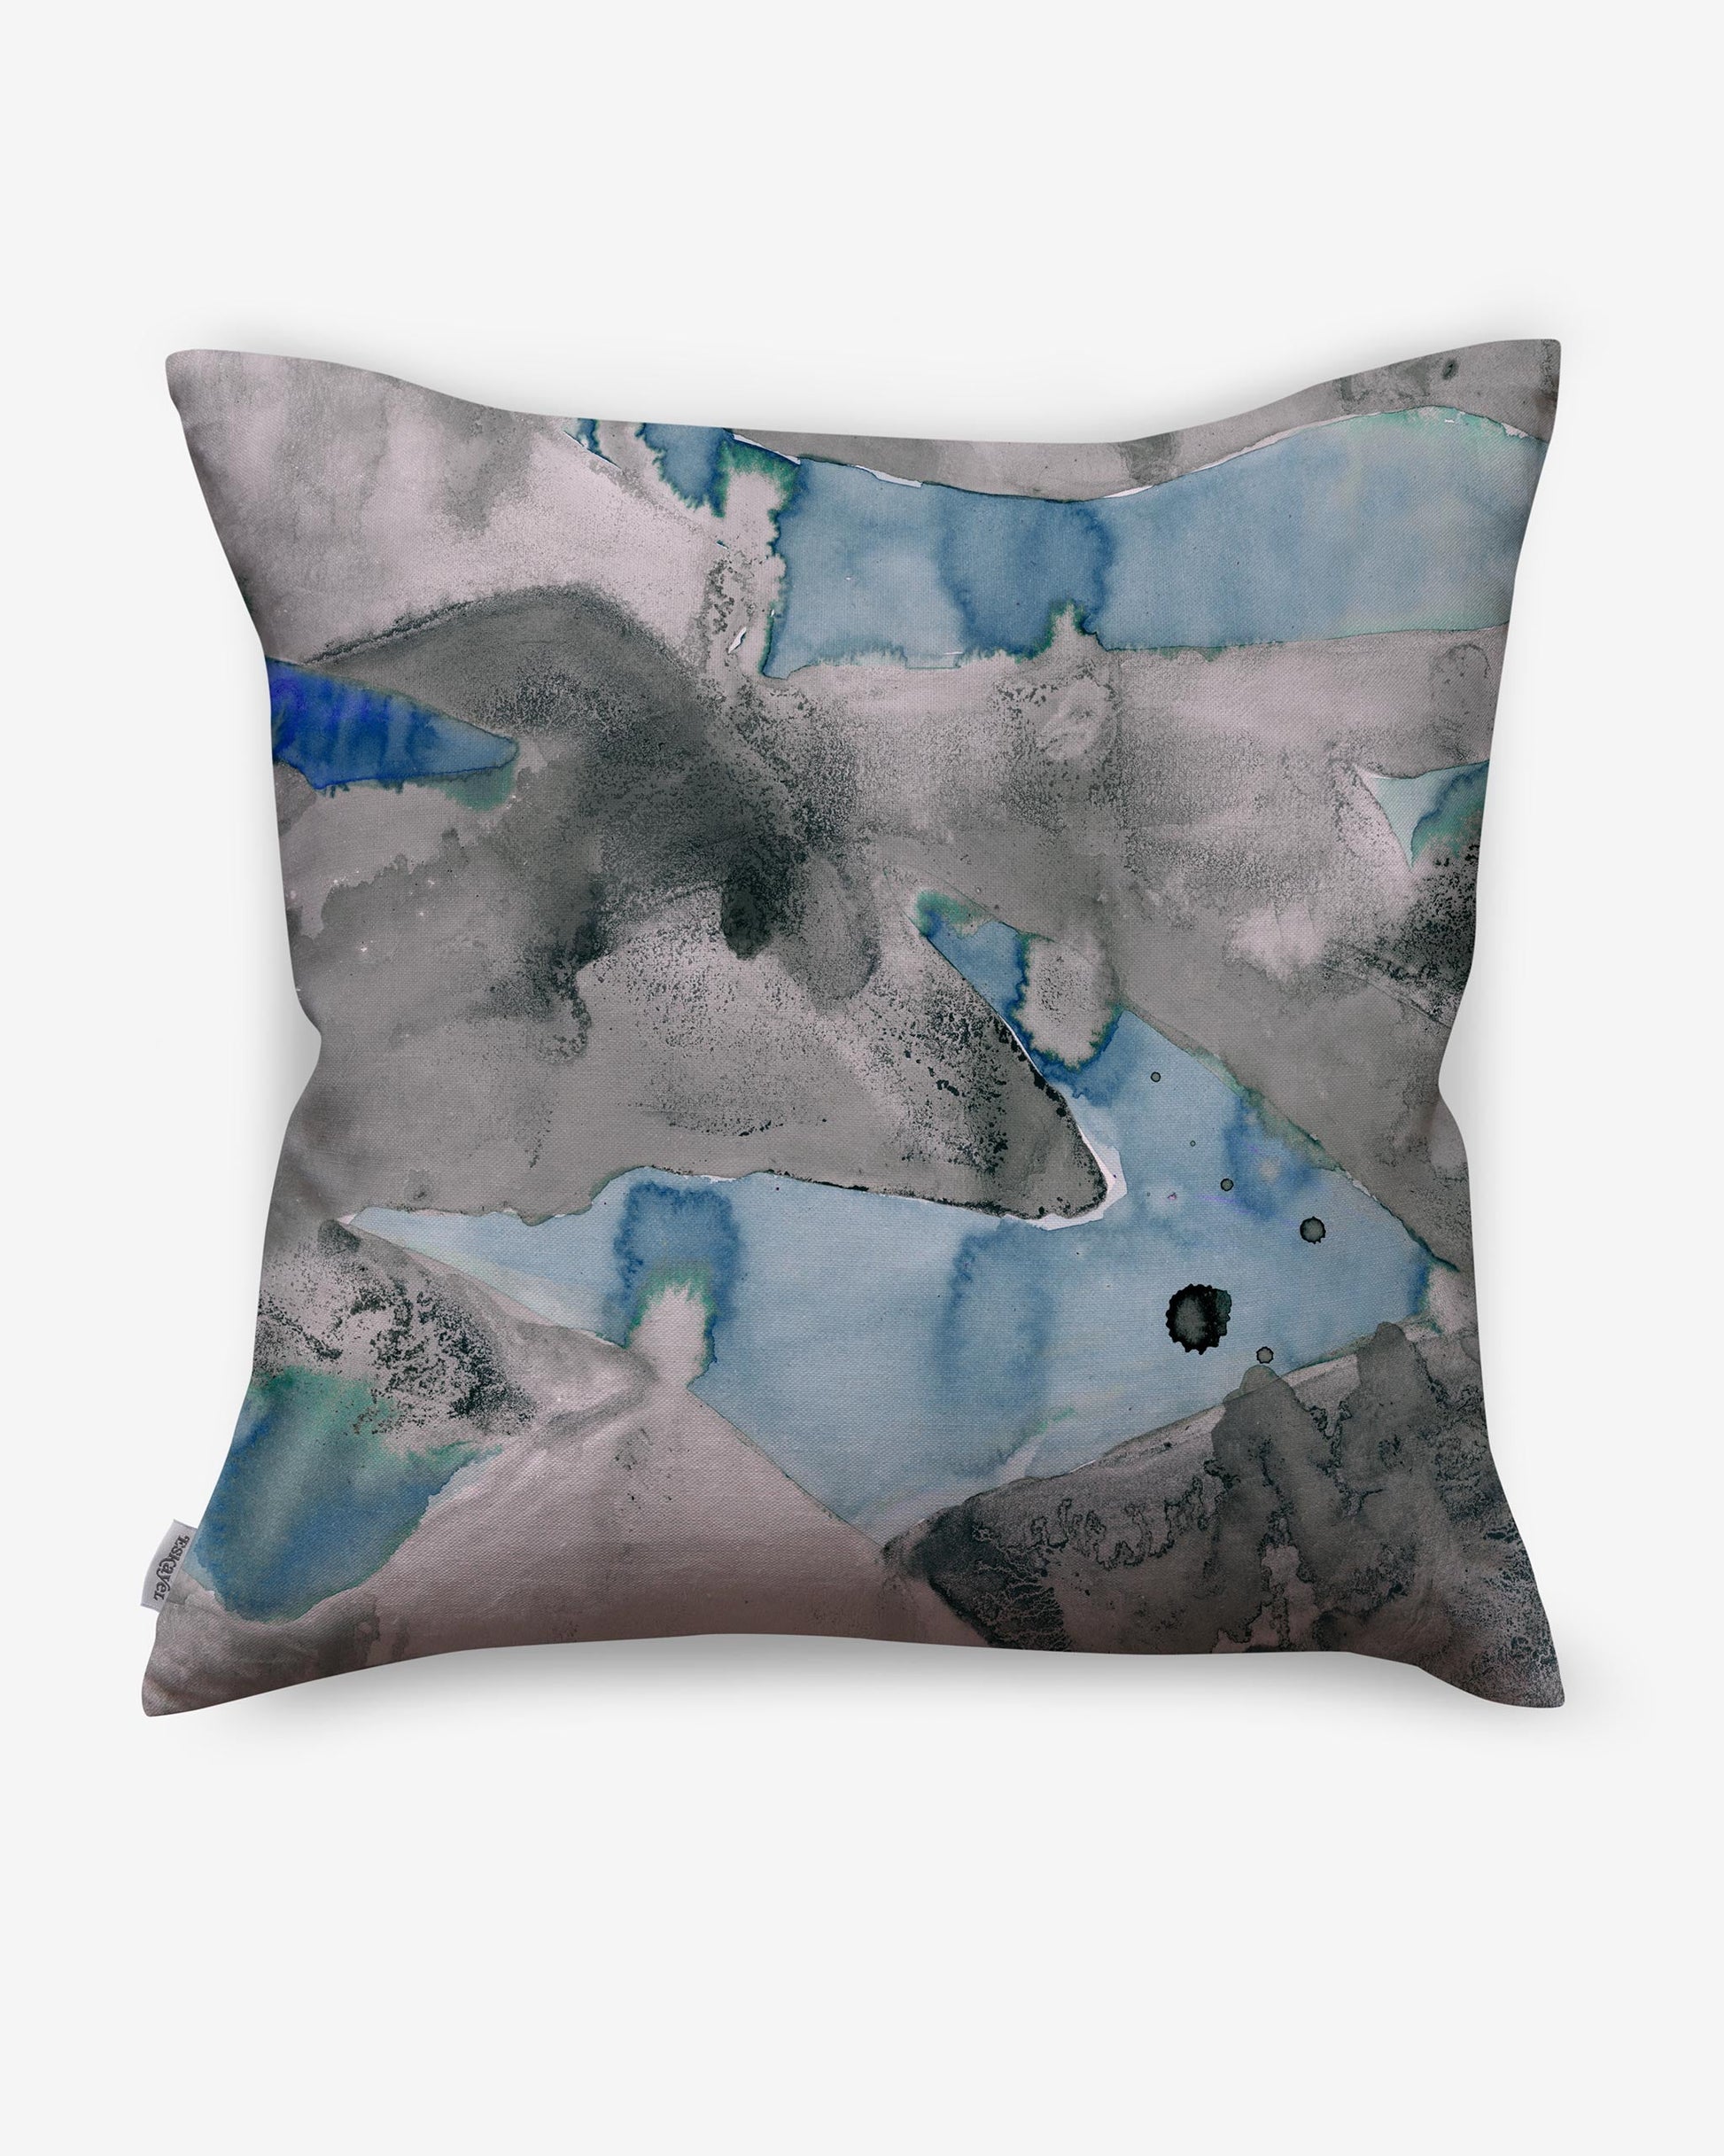 A Mani Pillow with an abstract painting on it